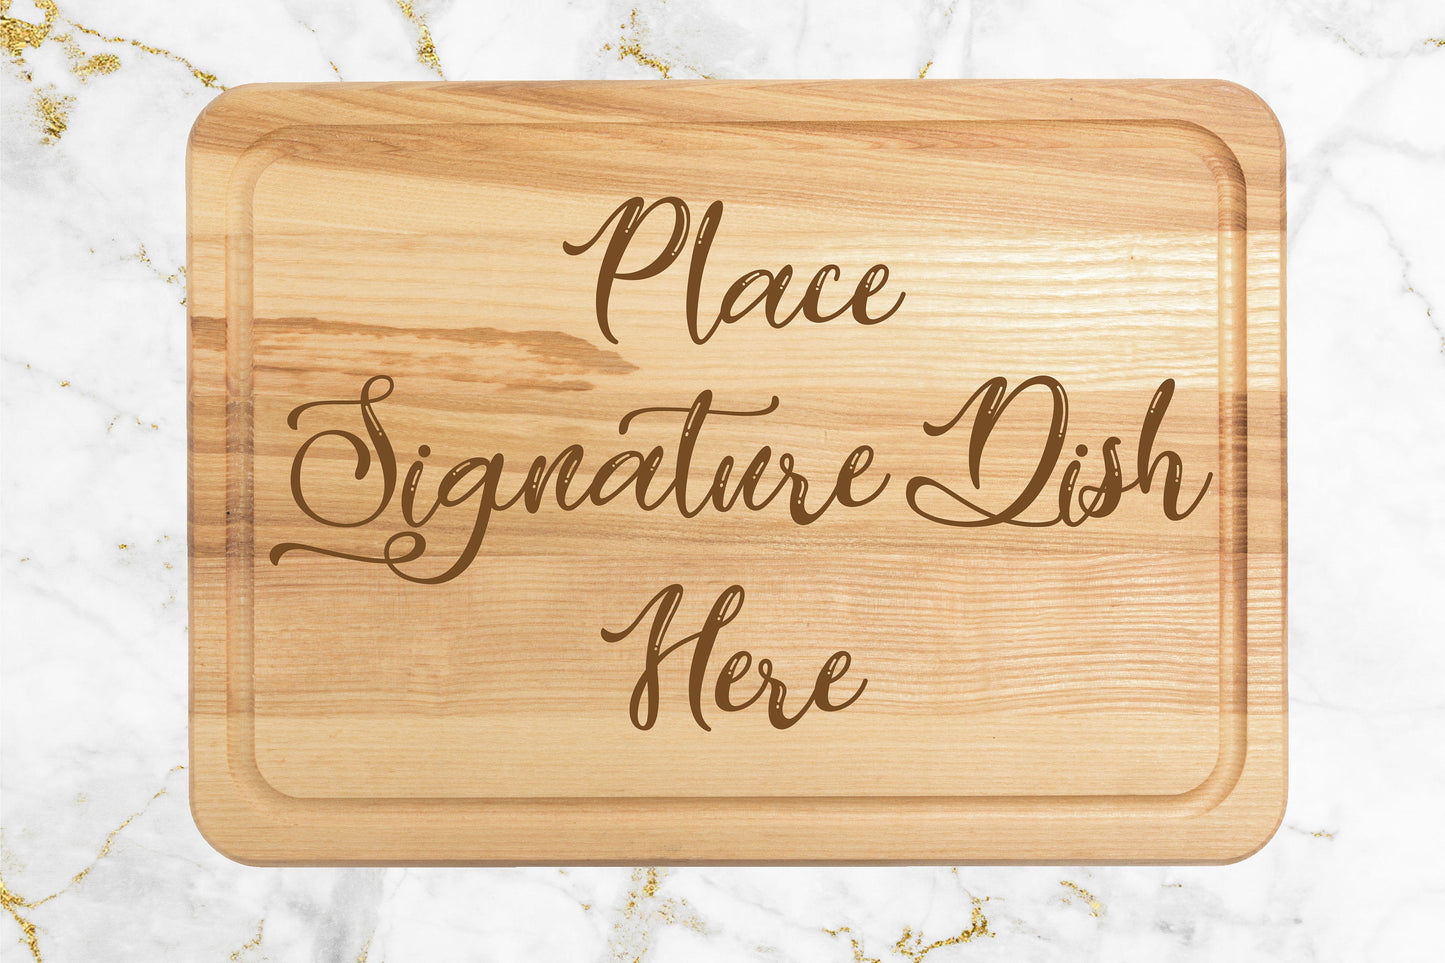 Place Signature Dish Here Engraved Wooden Cutting Board - Resplendent Aurora